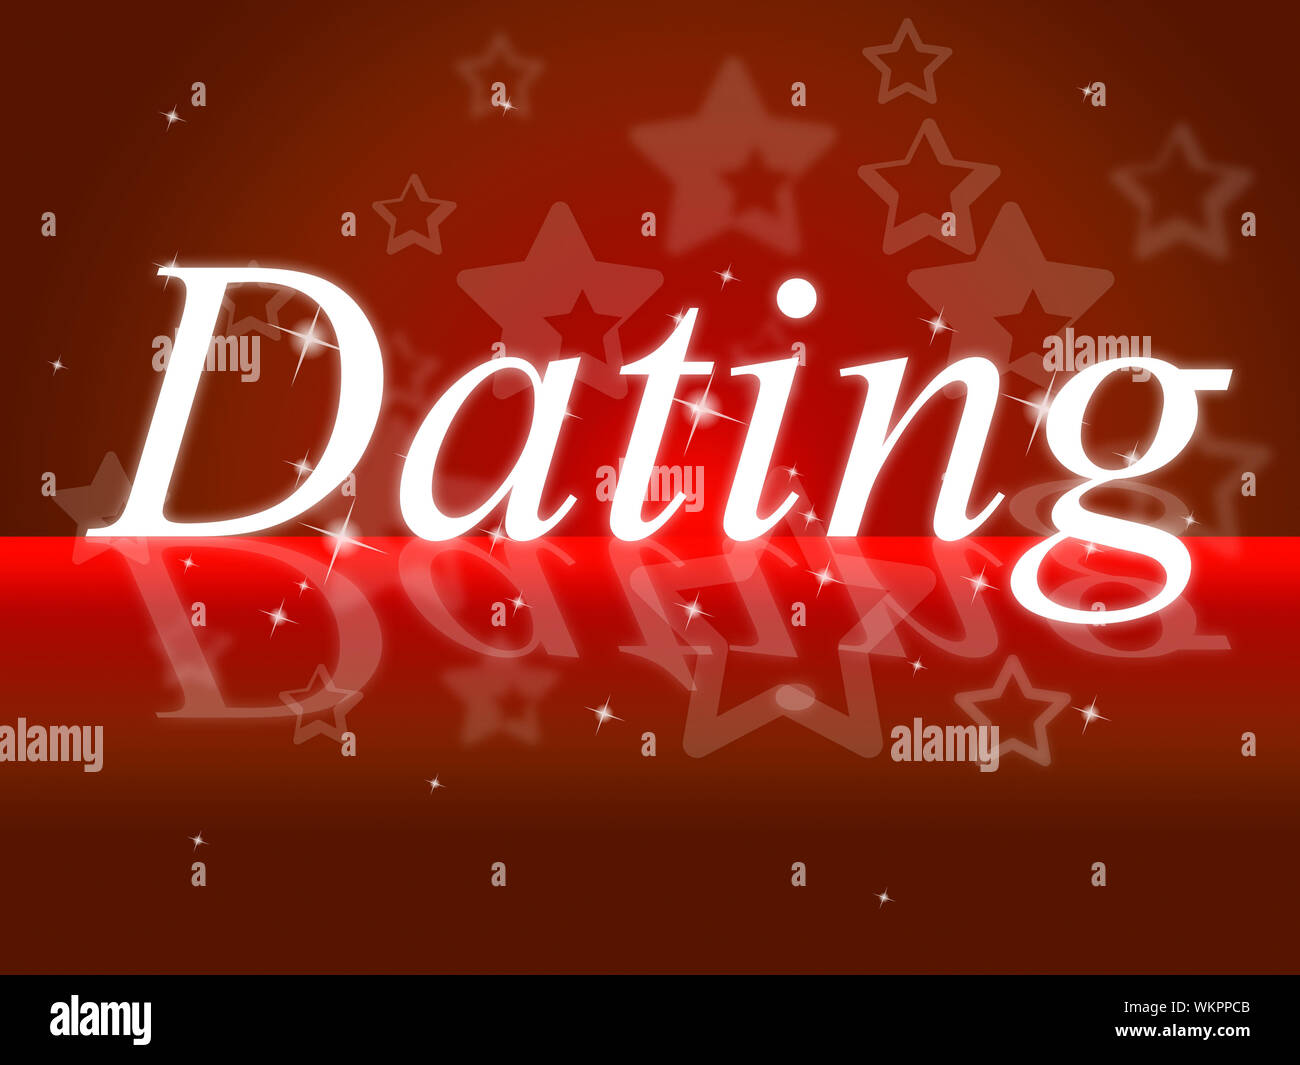 Dating Love Meaning Boyfriend Adoration And Heart Stock Photo - Alamy